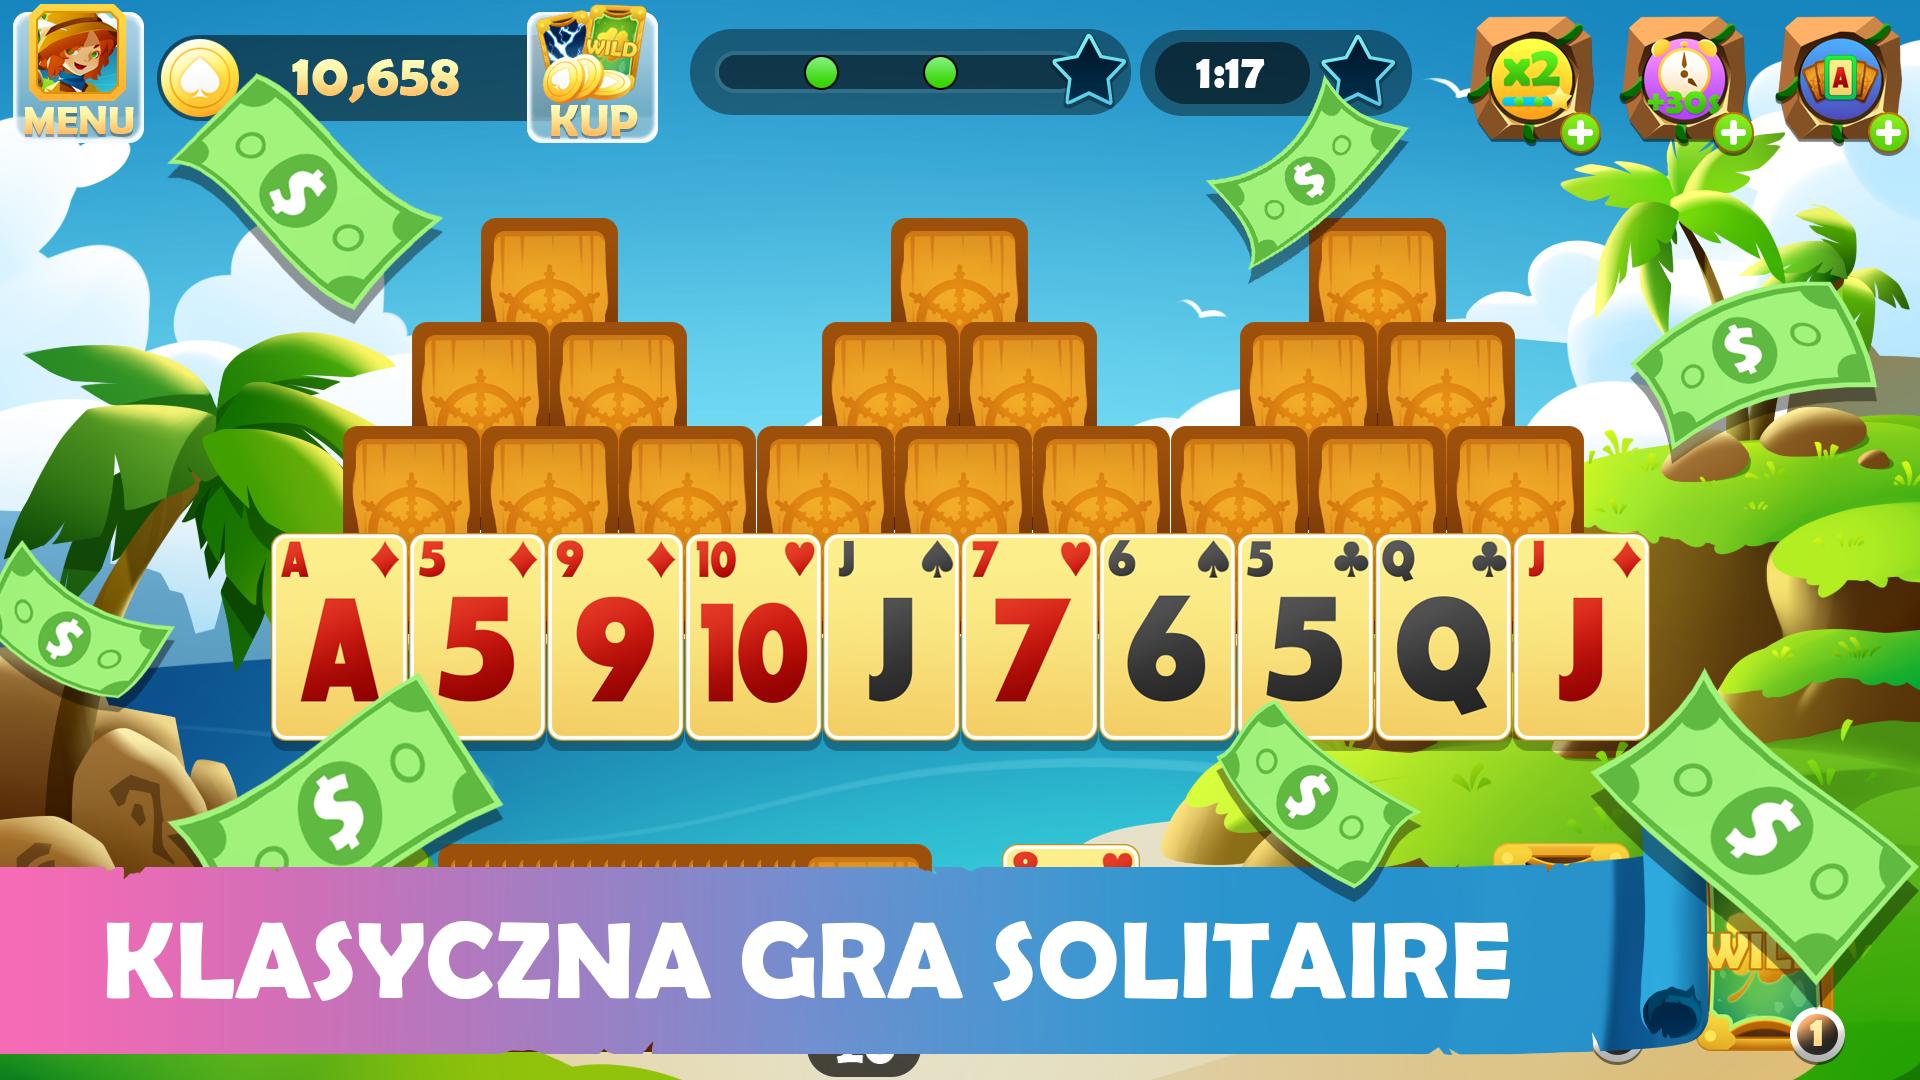 Solitaire TriPeaks - karciane for Android - APK Download